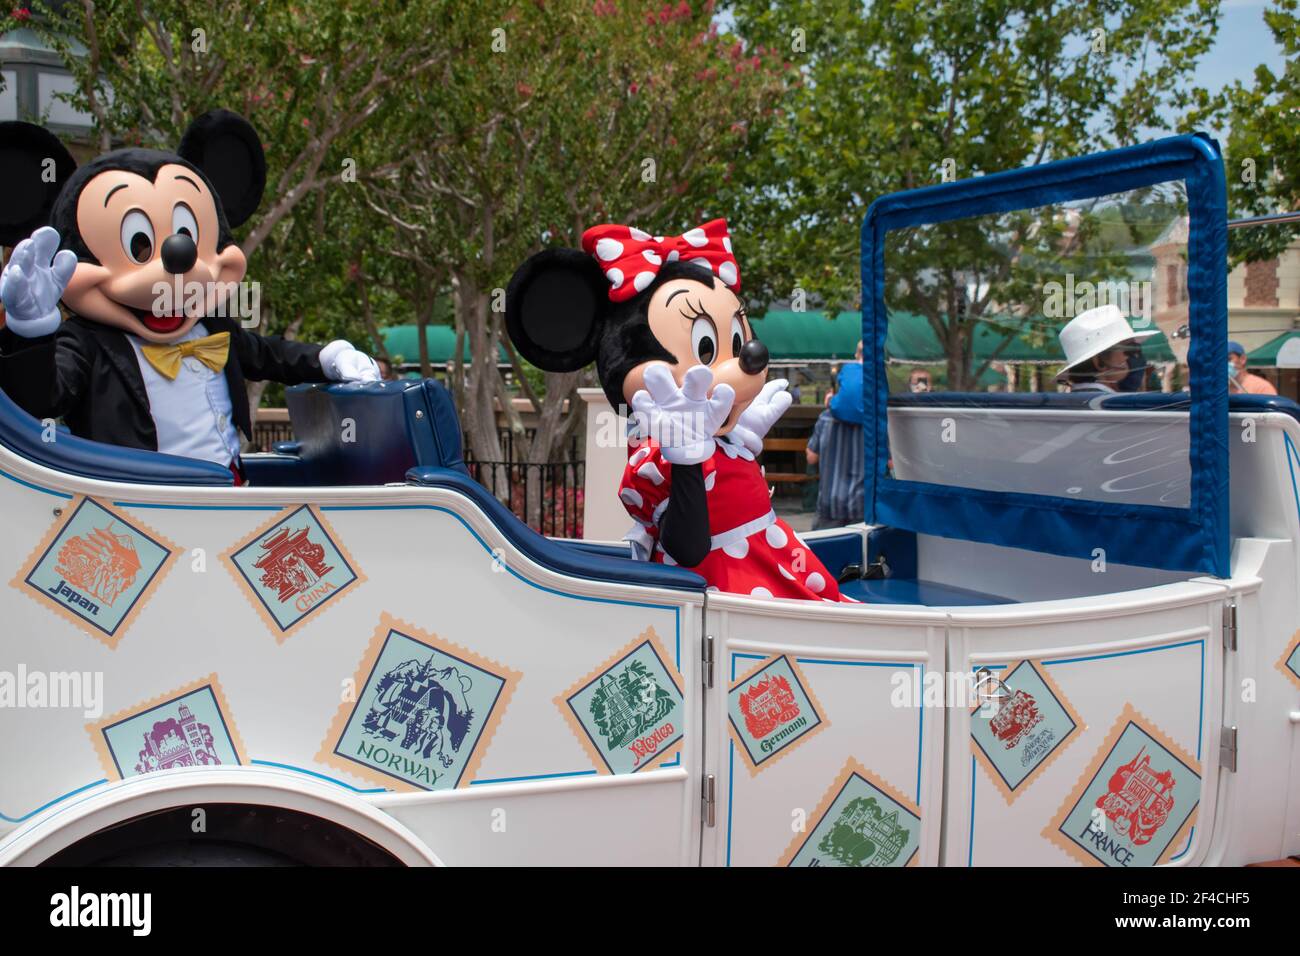 Orlando, Florida. July 29, 2020. Mickey and Minnie riding in a vintage ...